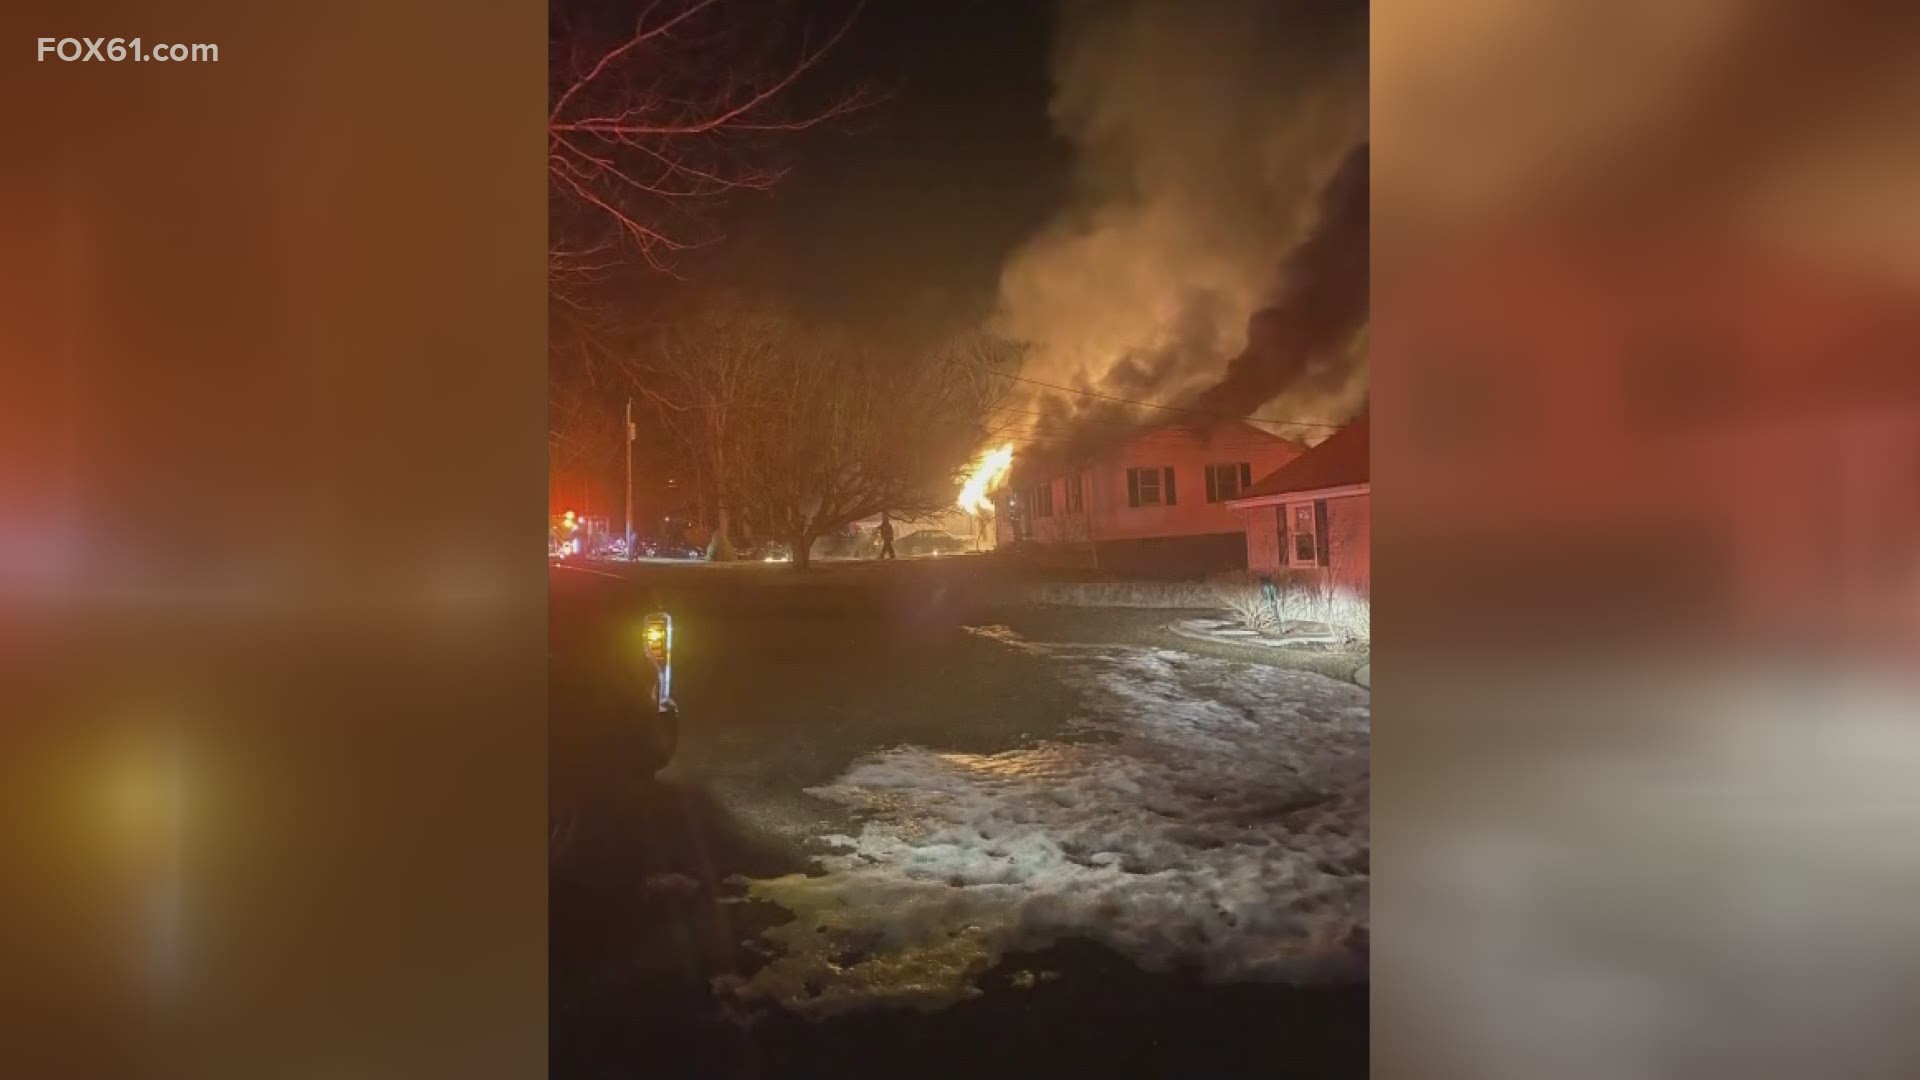 Two family pets were also killed in the fire